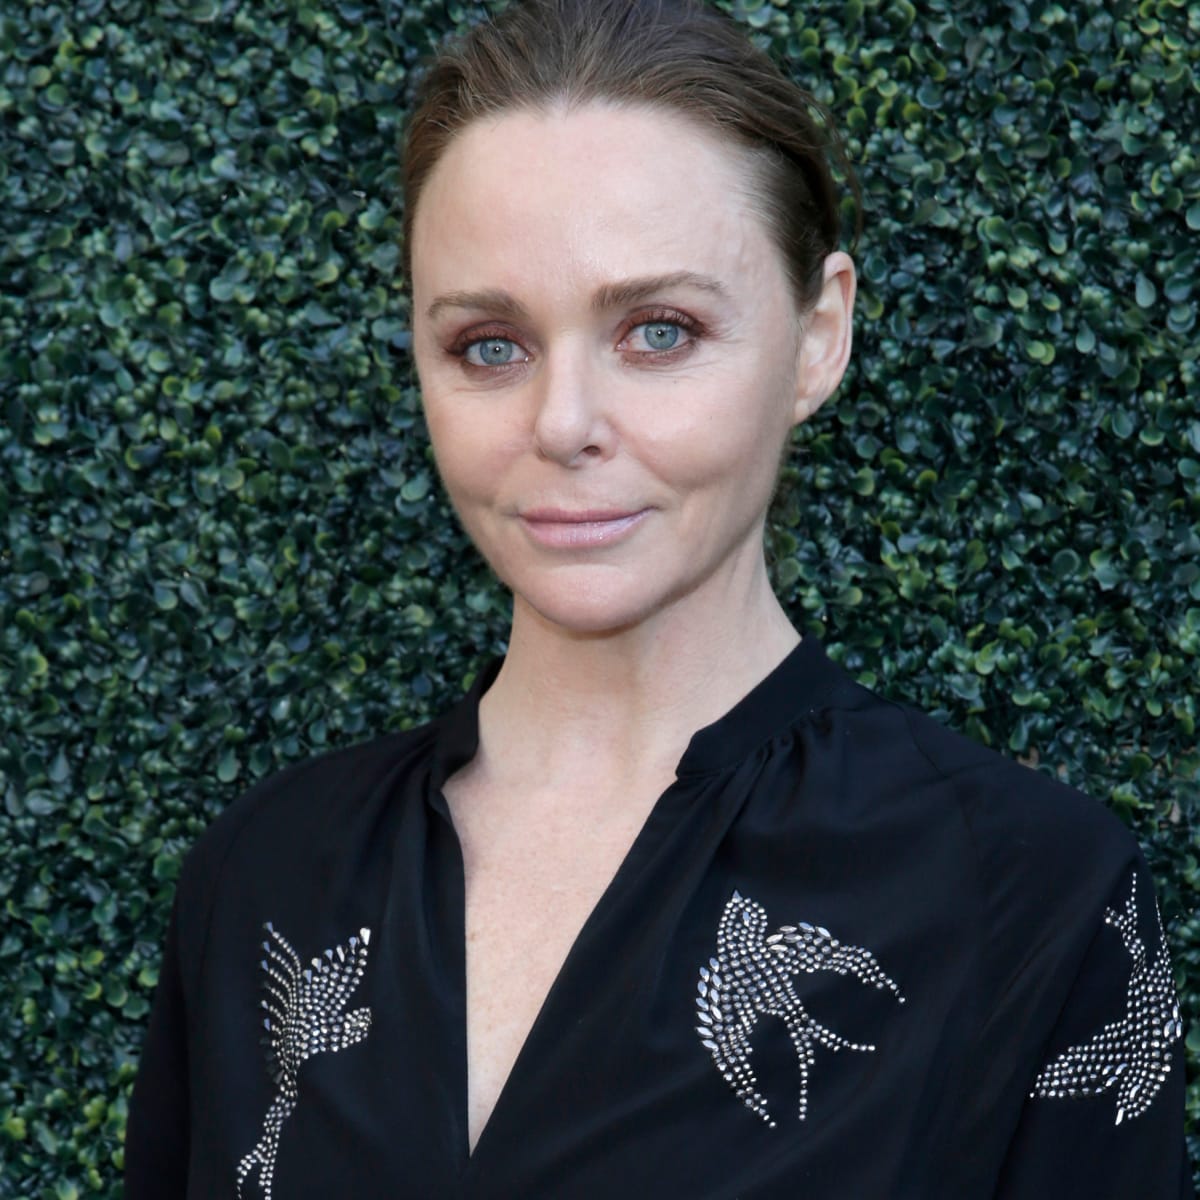 About LVMH and Stella McCartney's New 3-Piece Skincare Line